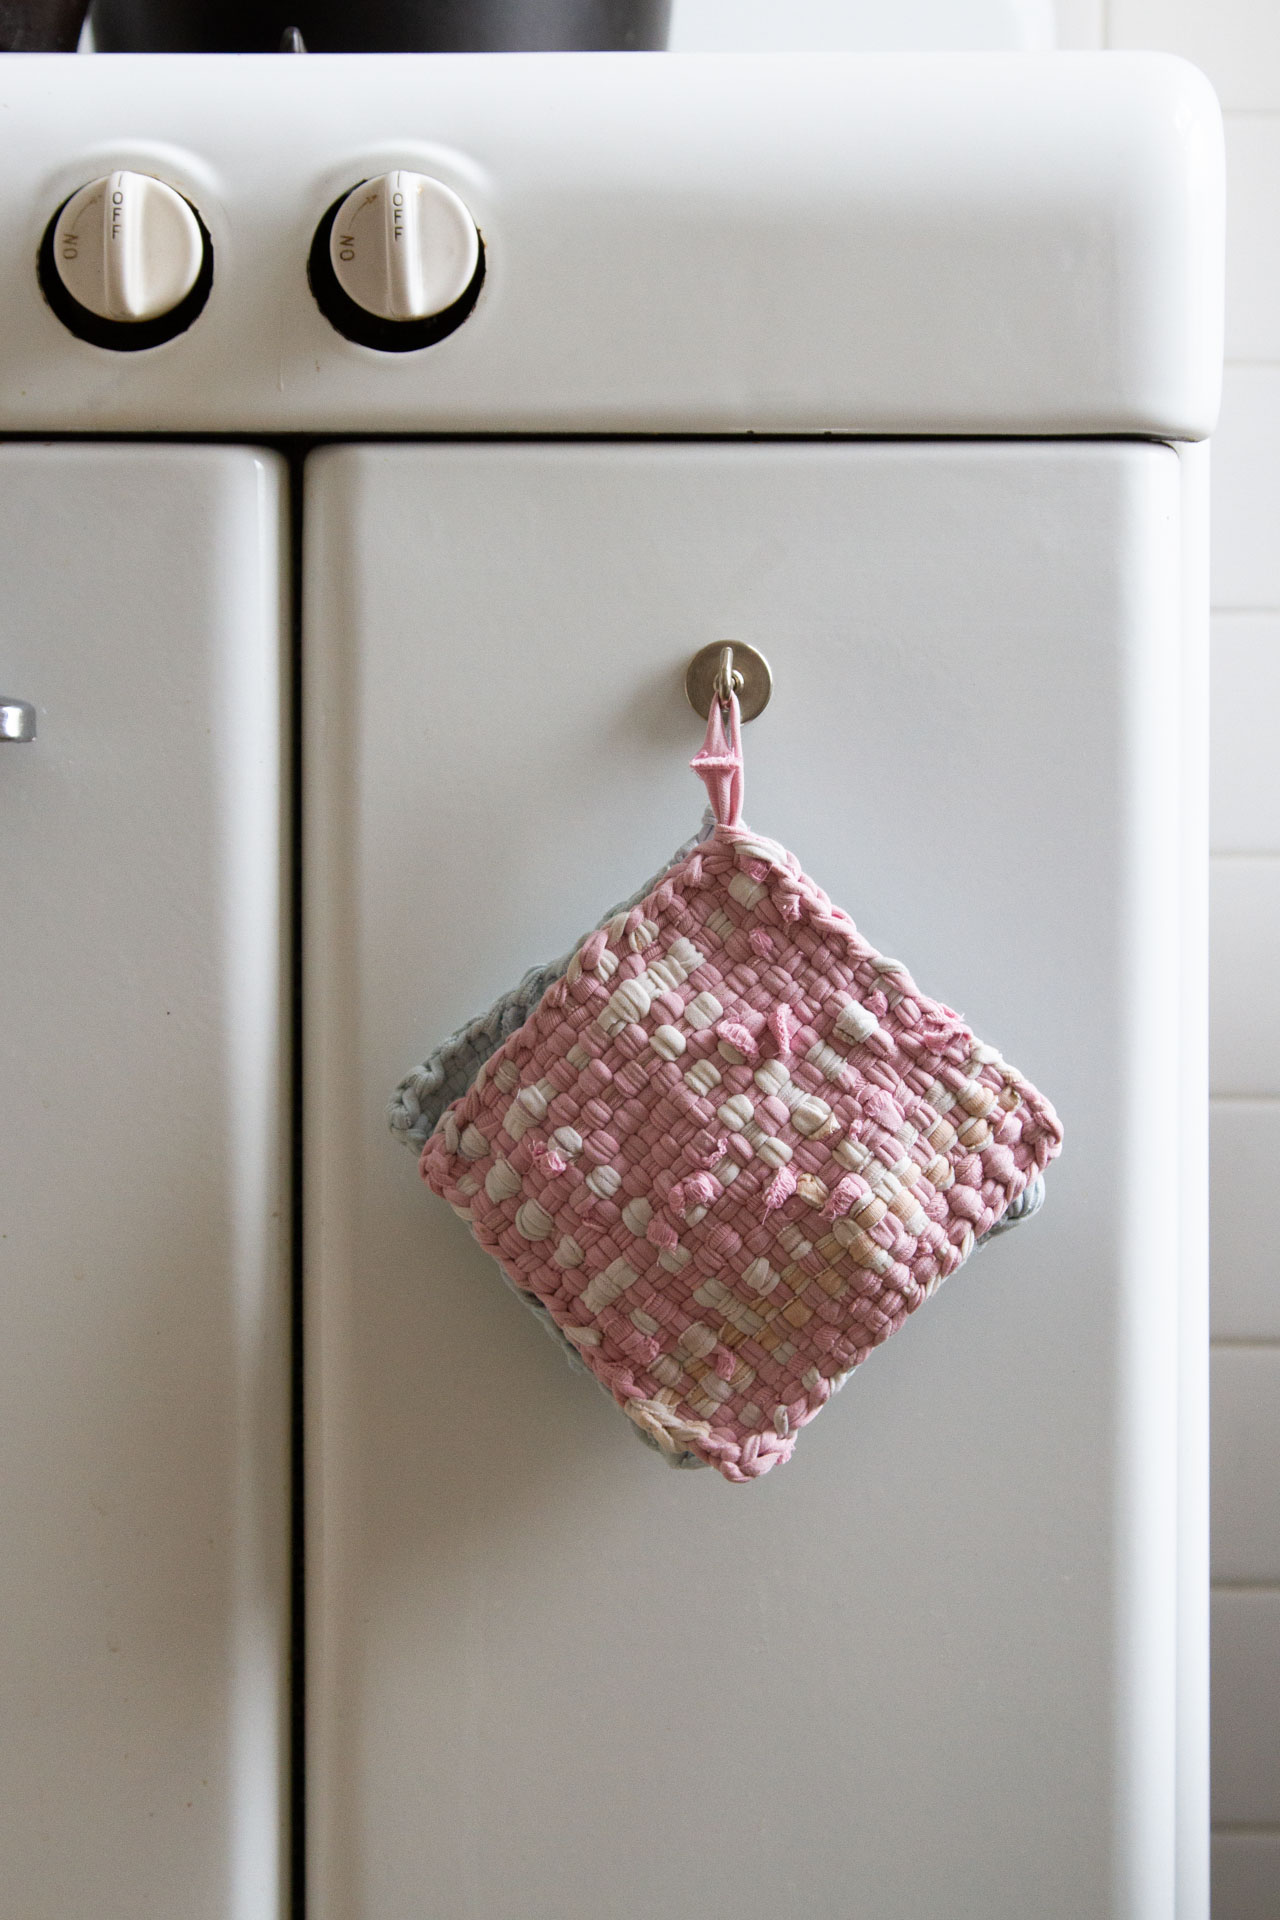 make your own: recycled potholders. – Reading My Tea Leaves – Slow